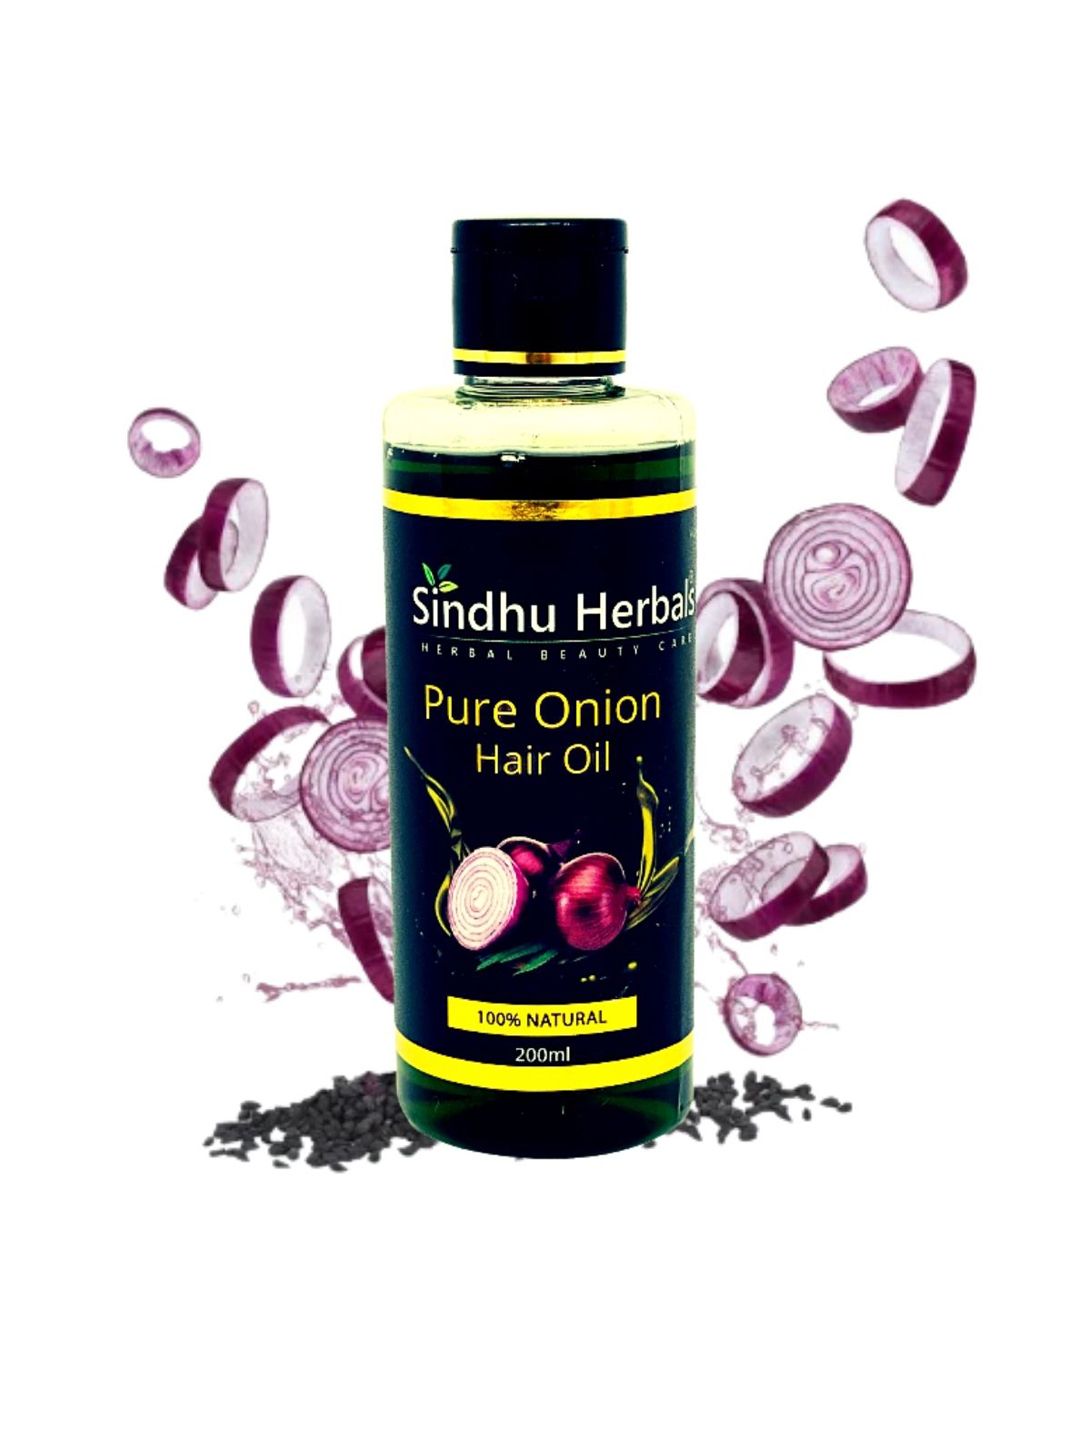 Sindhu Herbals Pure Onion Hair Oil for Hair Regrowth - 200ml Price in India